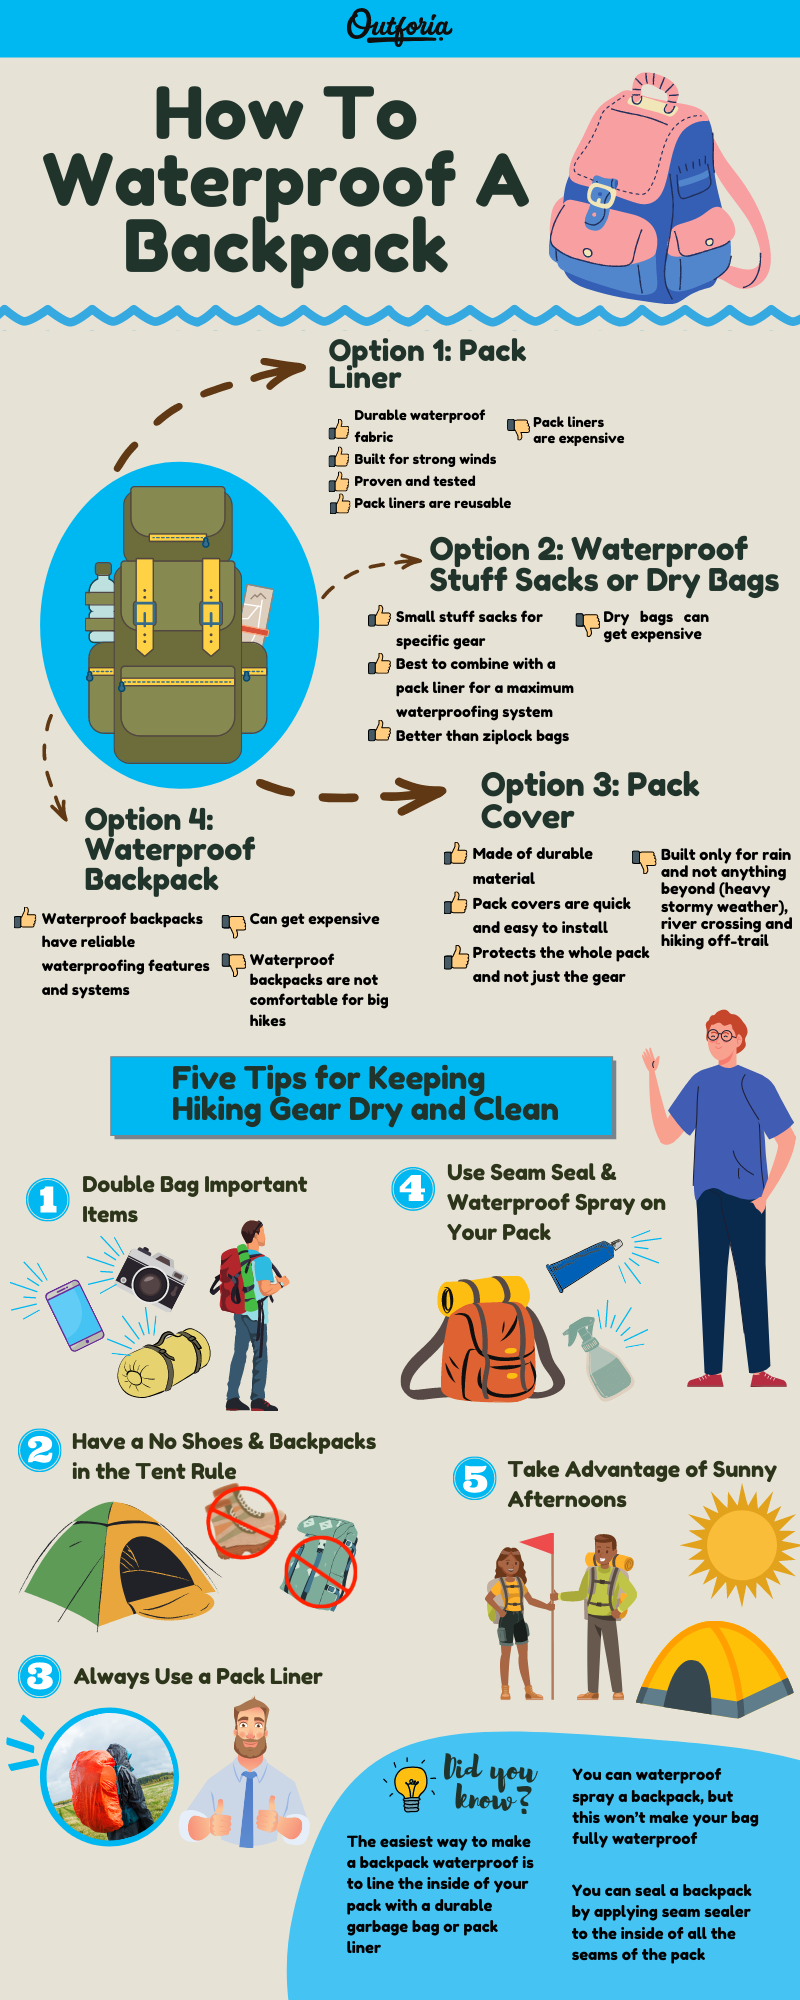 How to waterproof a backpack infographic